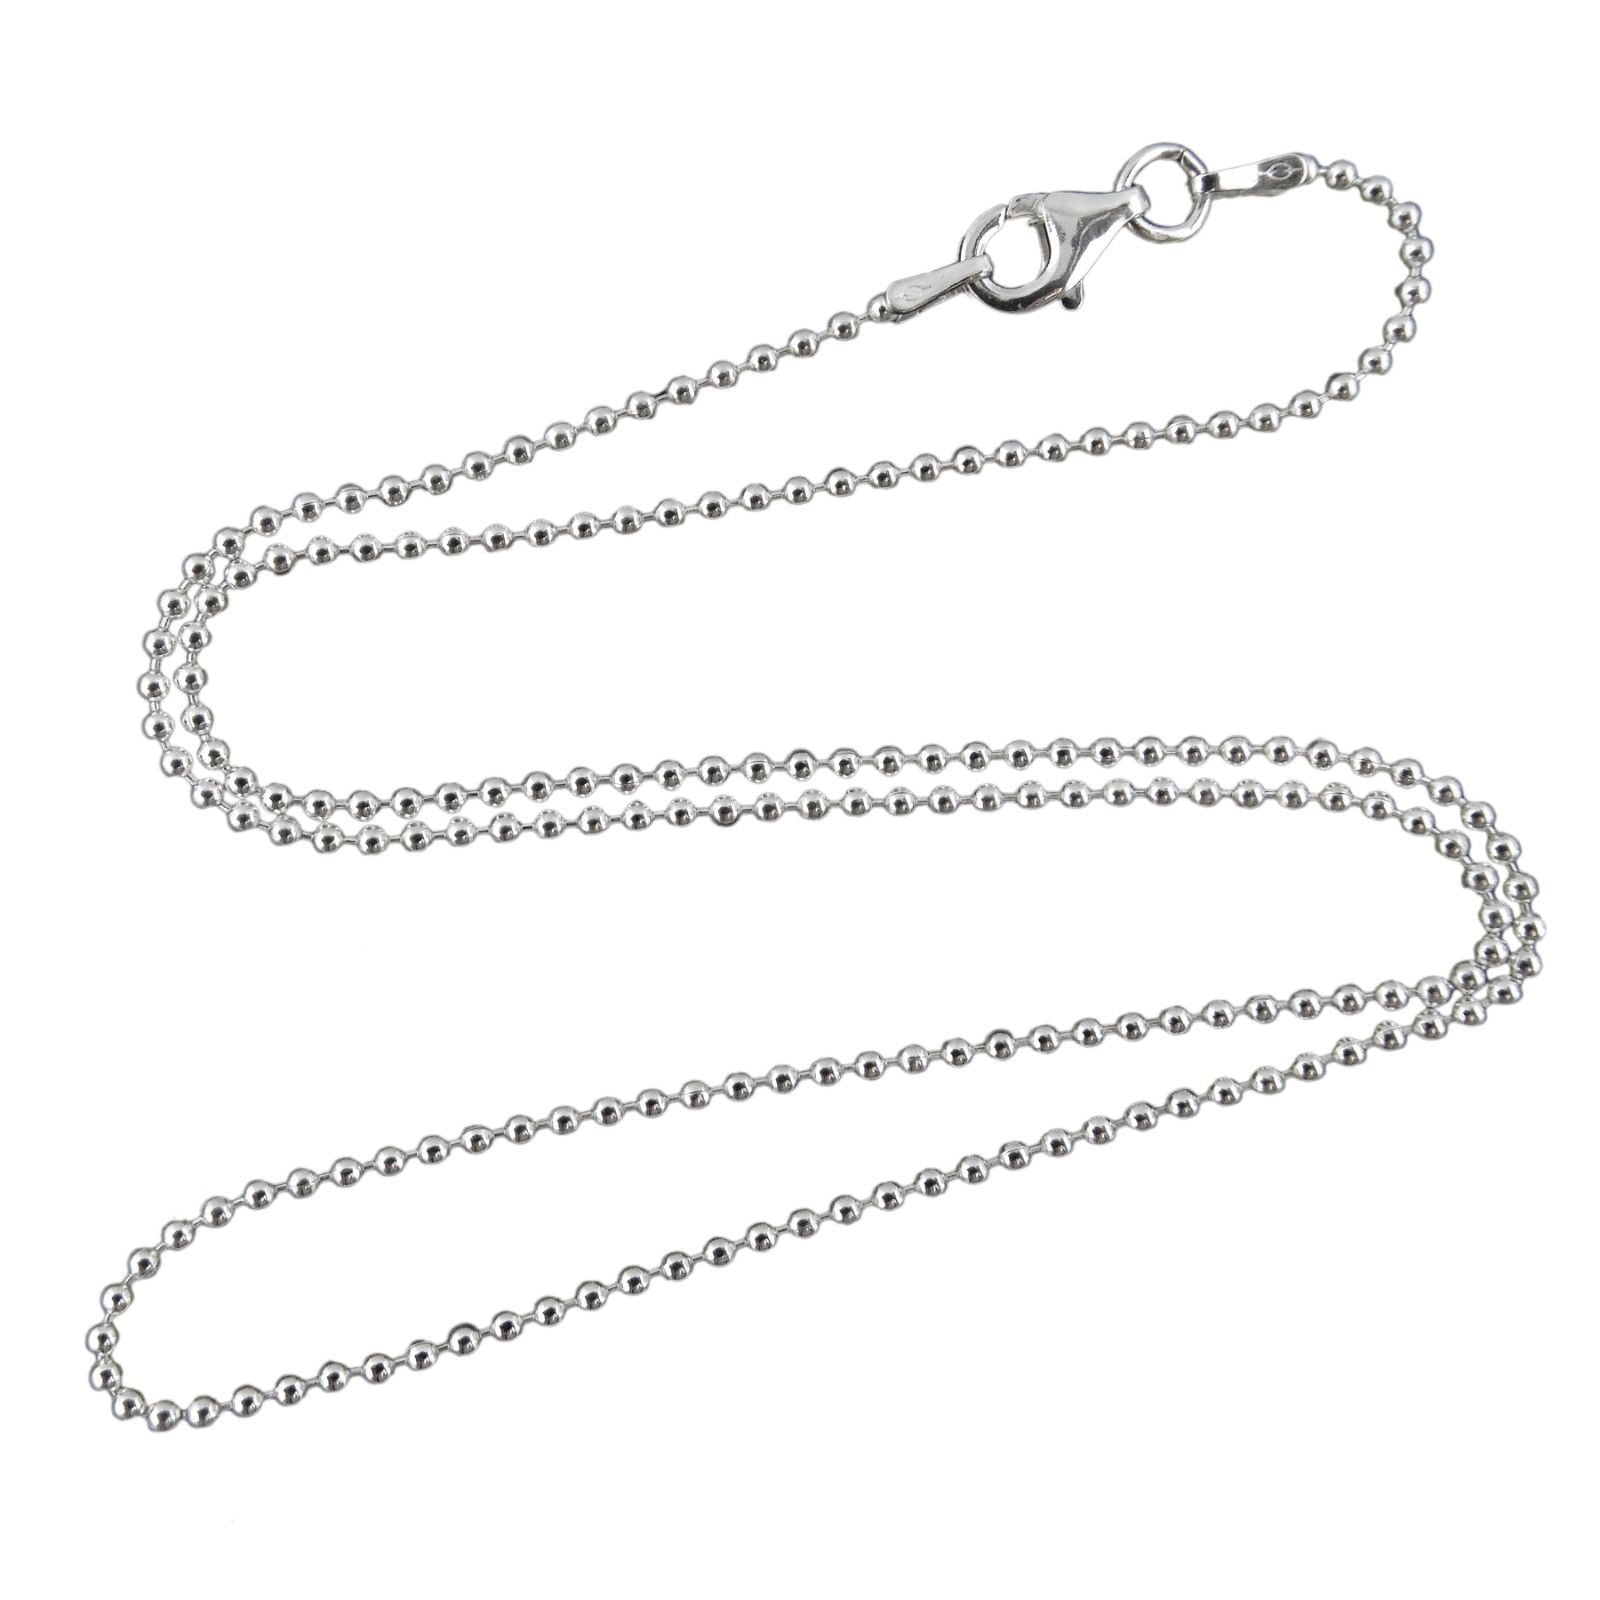 PRETTY 925 STERLING SILVER 1MM BALL CHAIN 16"-24" WITH LOBSTER CLASP